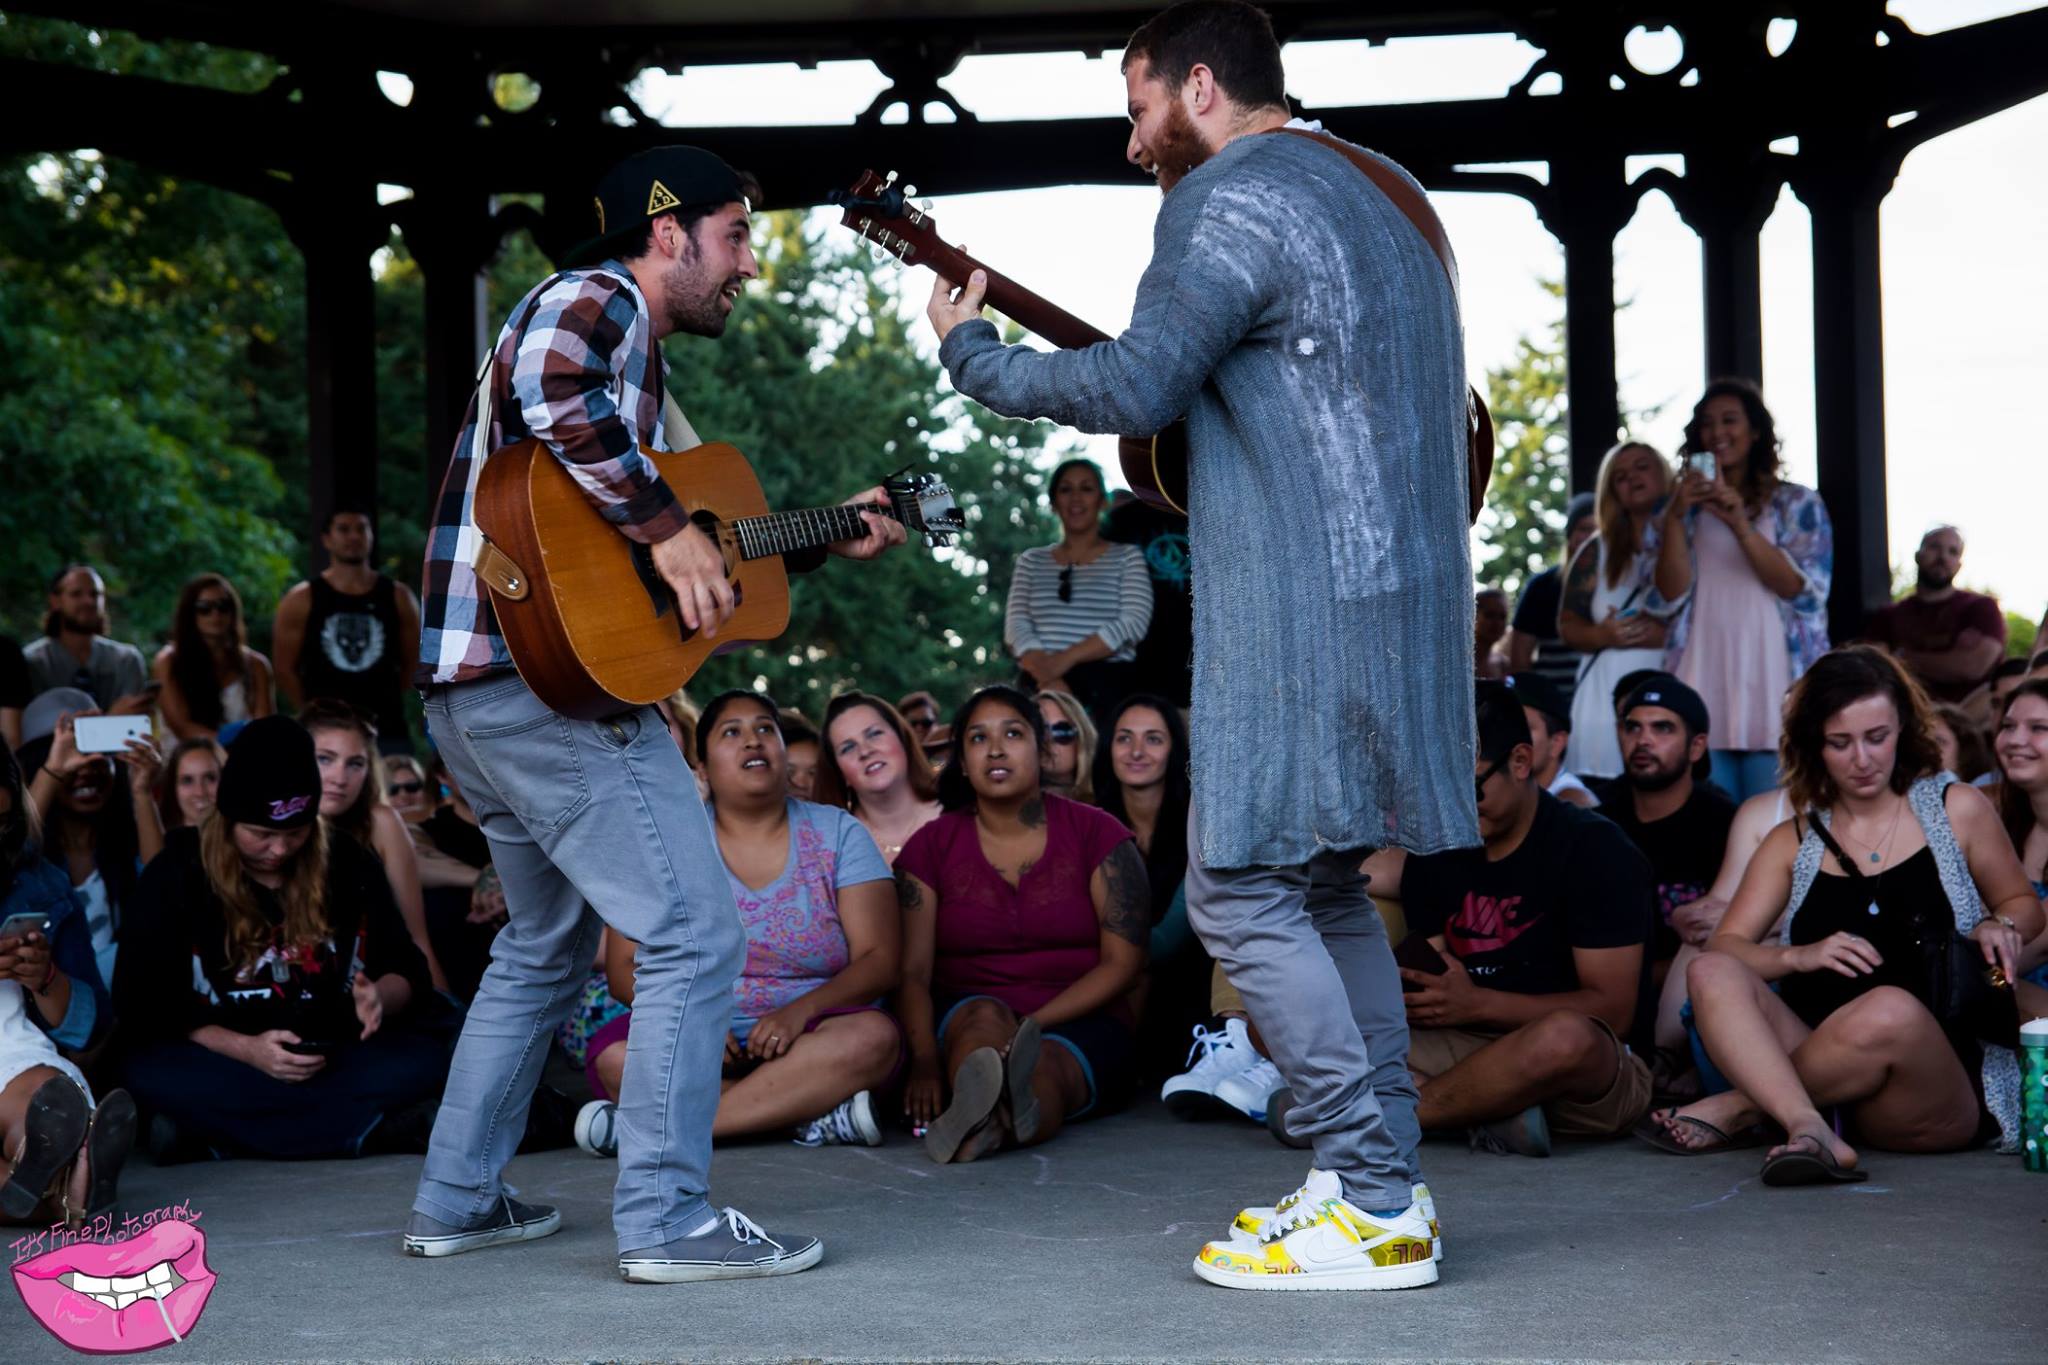 Mike Posner and Adam Friedman performing at Peninsula Park in Portland, OR July 15, 2015
Photo by Adin Penner / It's Fine Photography
facebook.com/itsfinephotography
